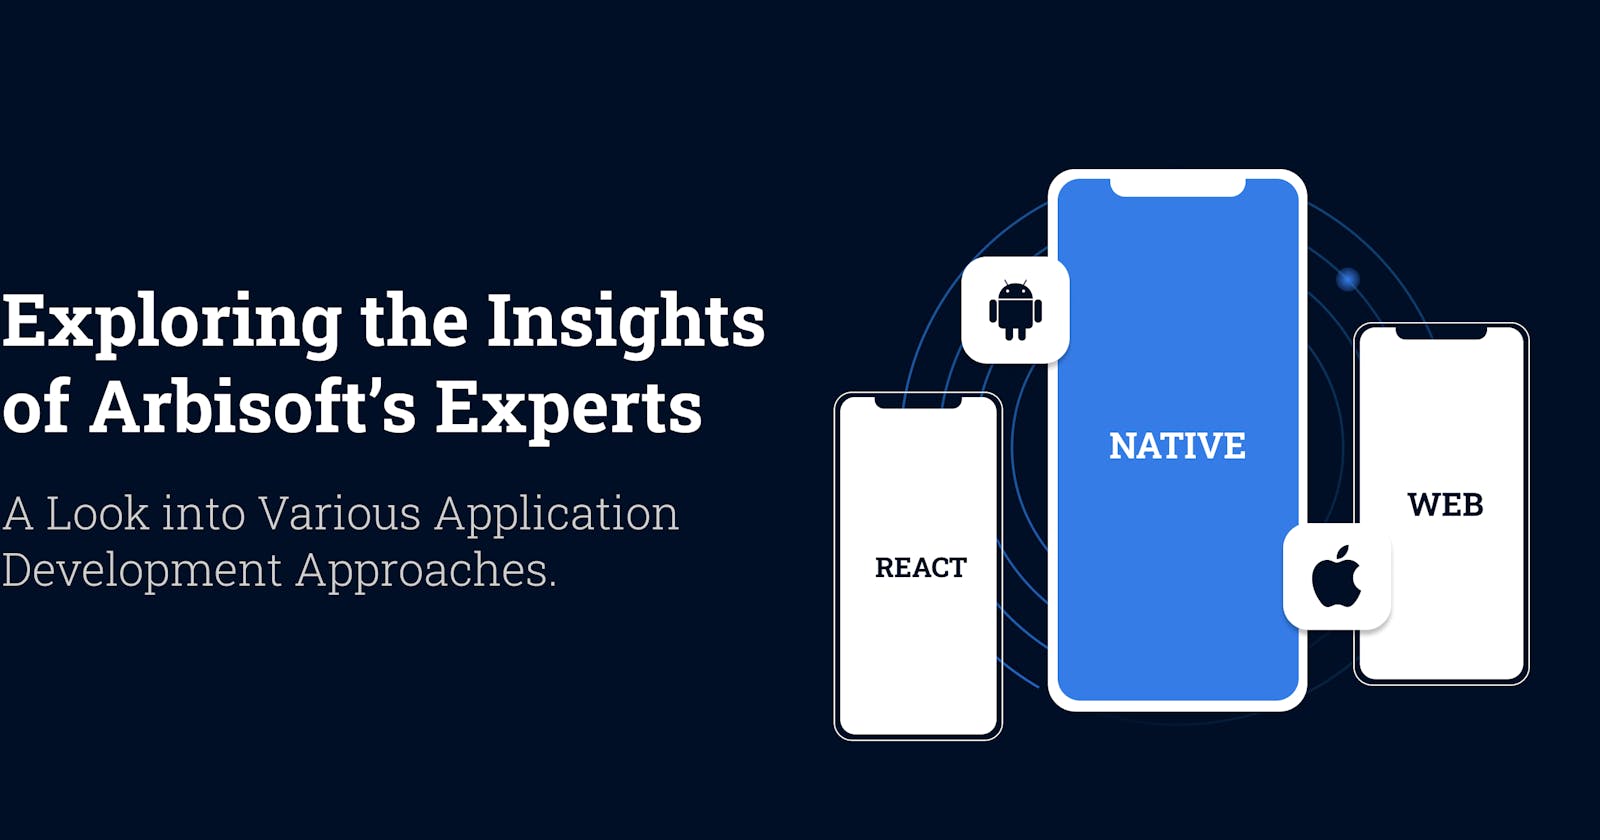 Exploring the Insights of Arbisoft’s Experts: A Look into Various Application Development Approaches